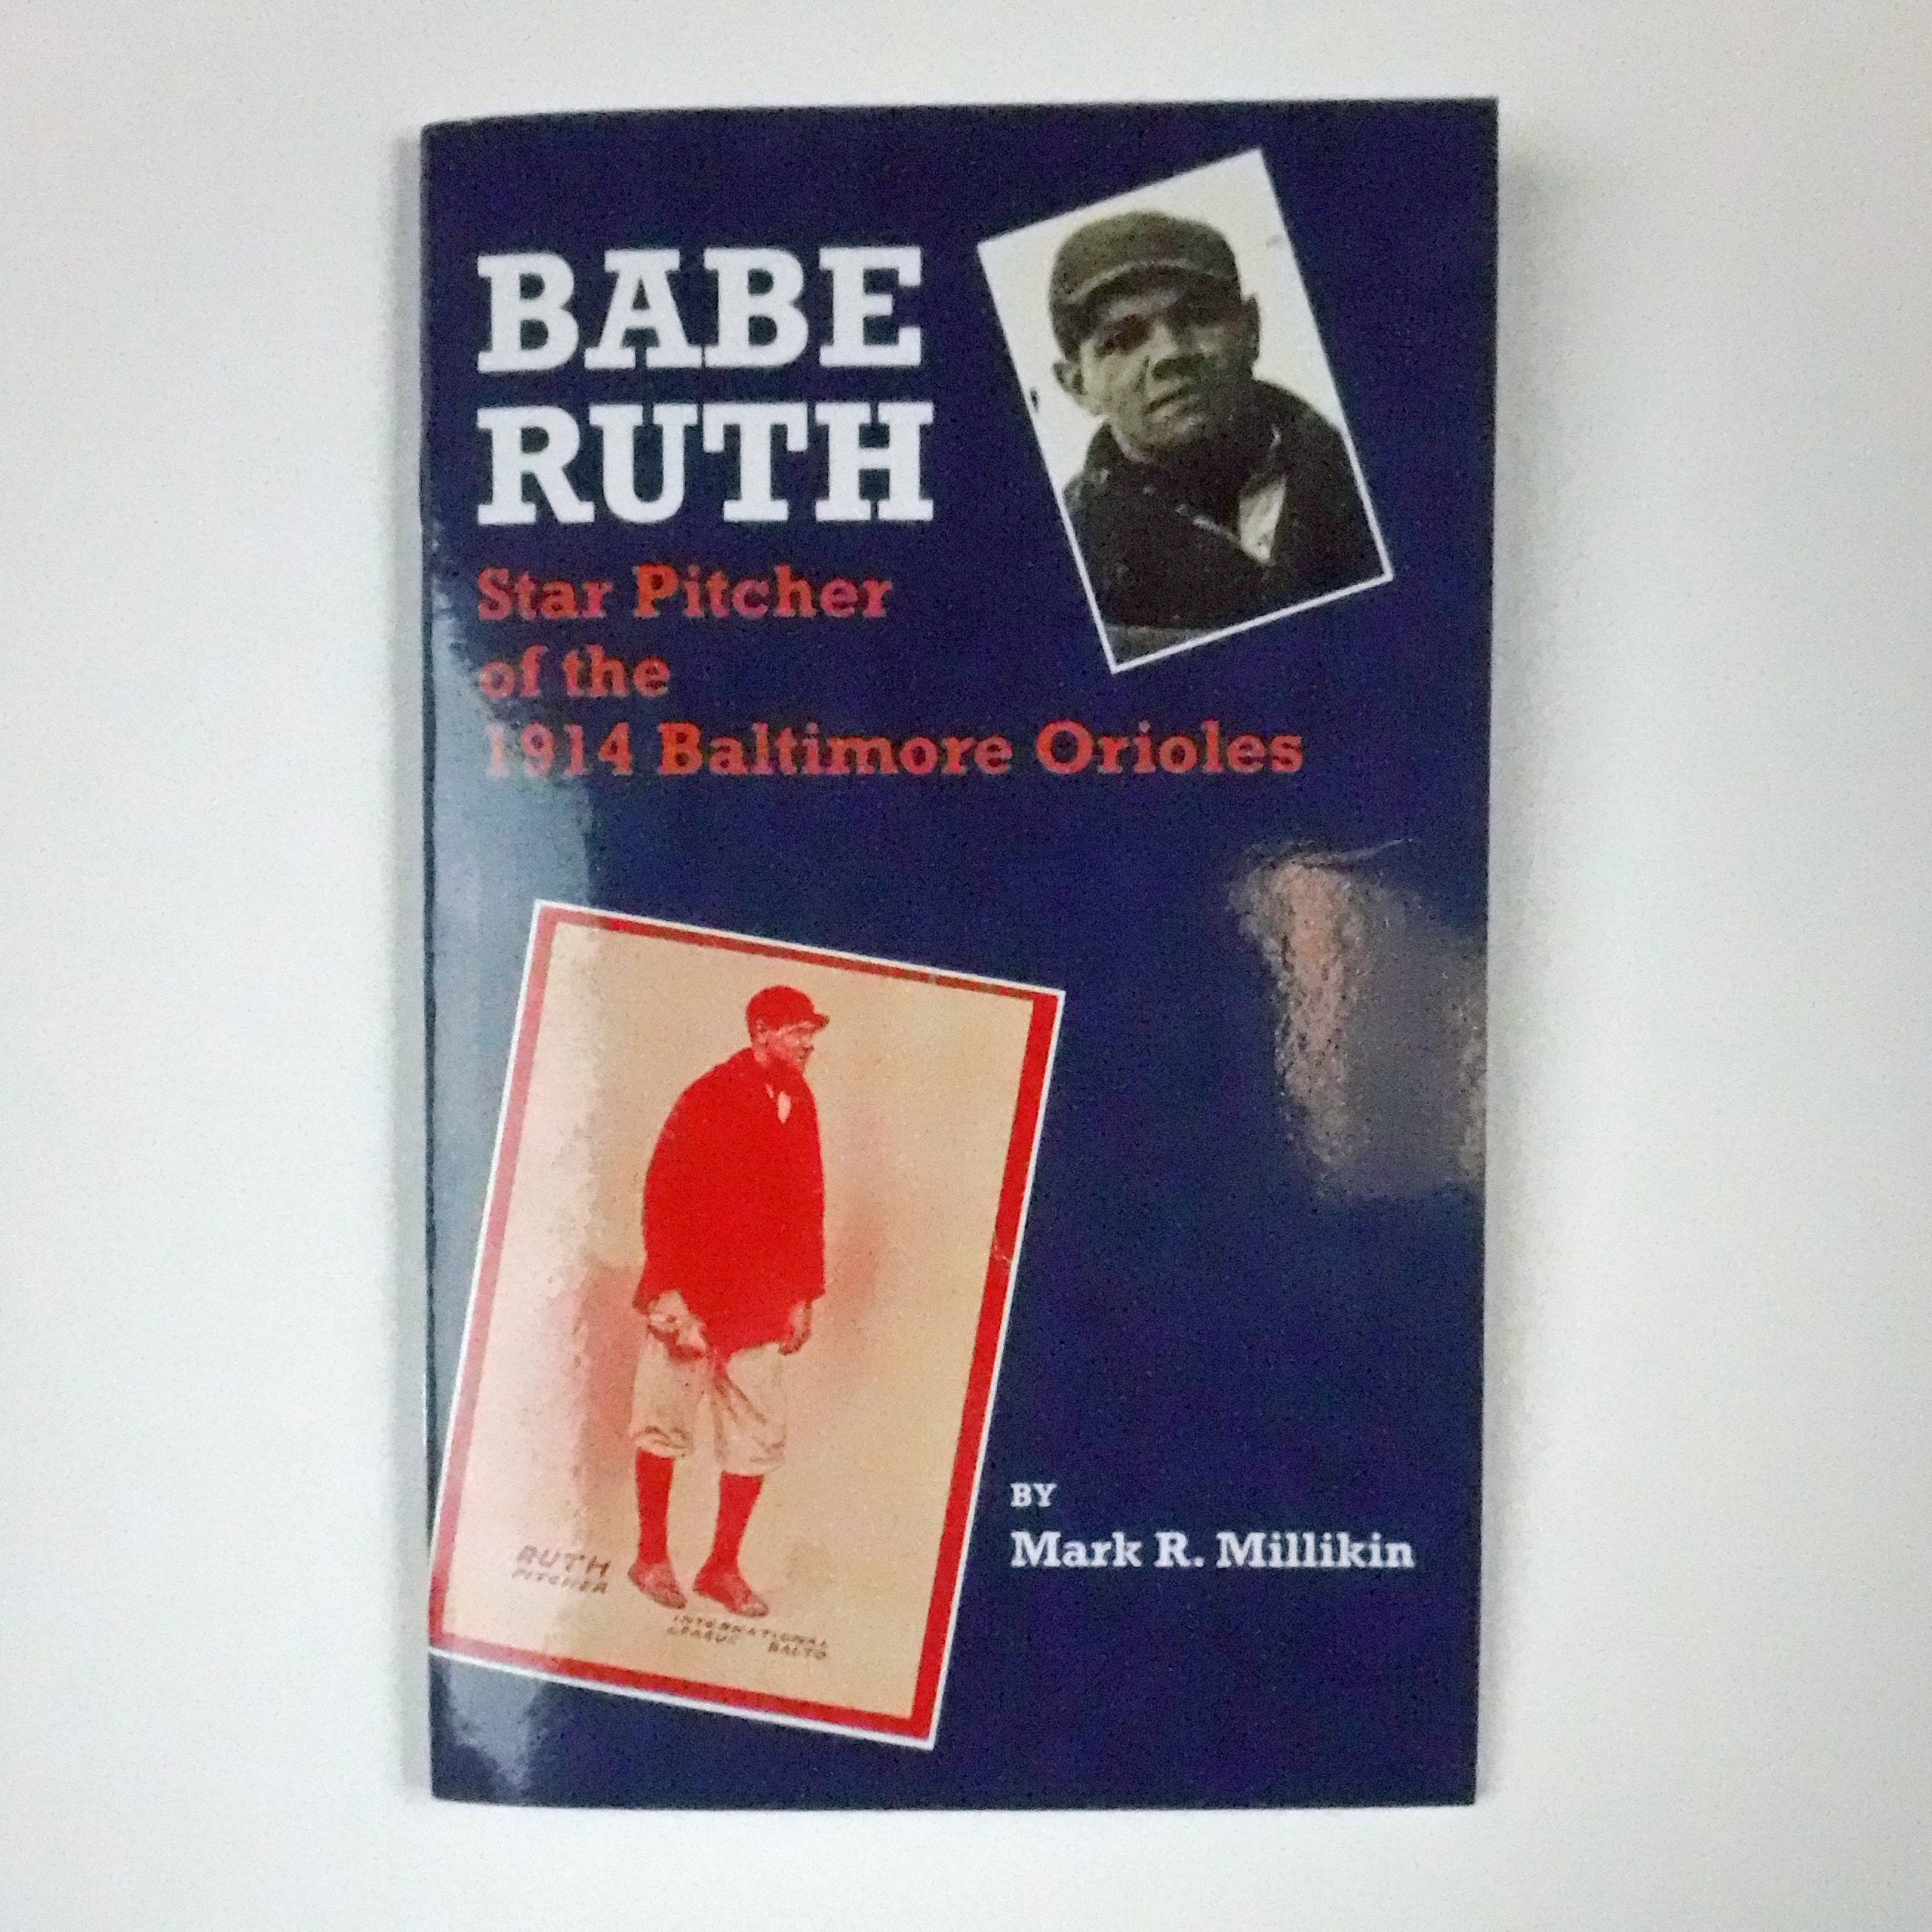 Babe Ruth: Star Pitcher of the 1914 Baltimore Orioles